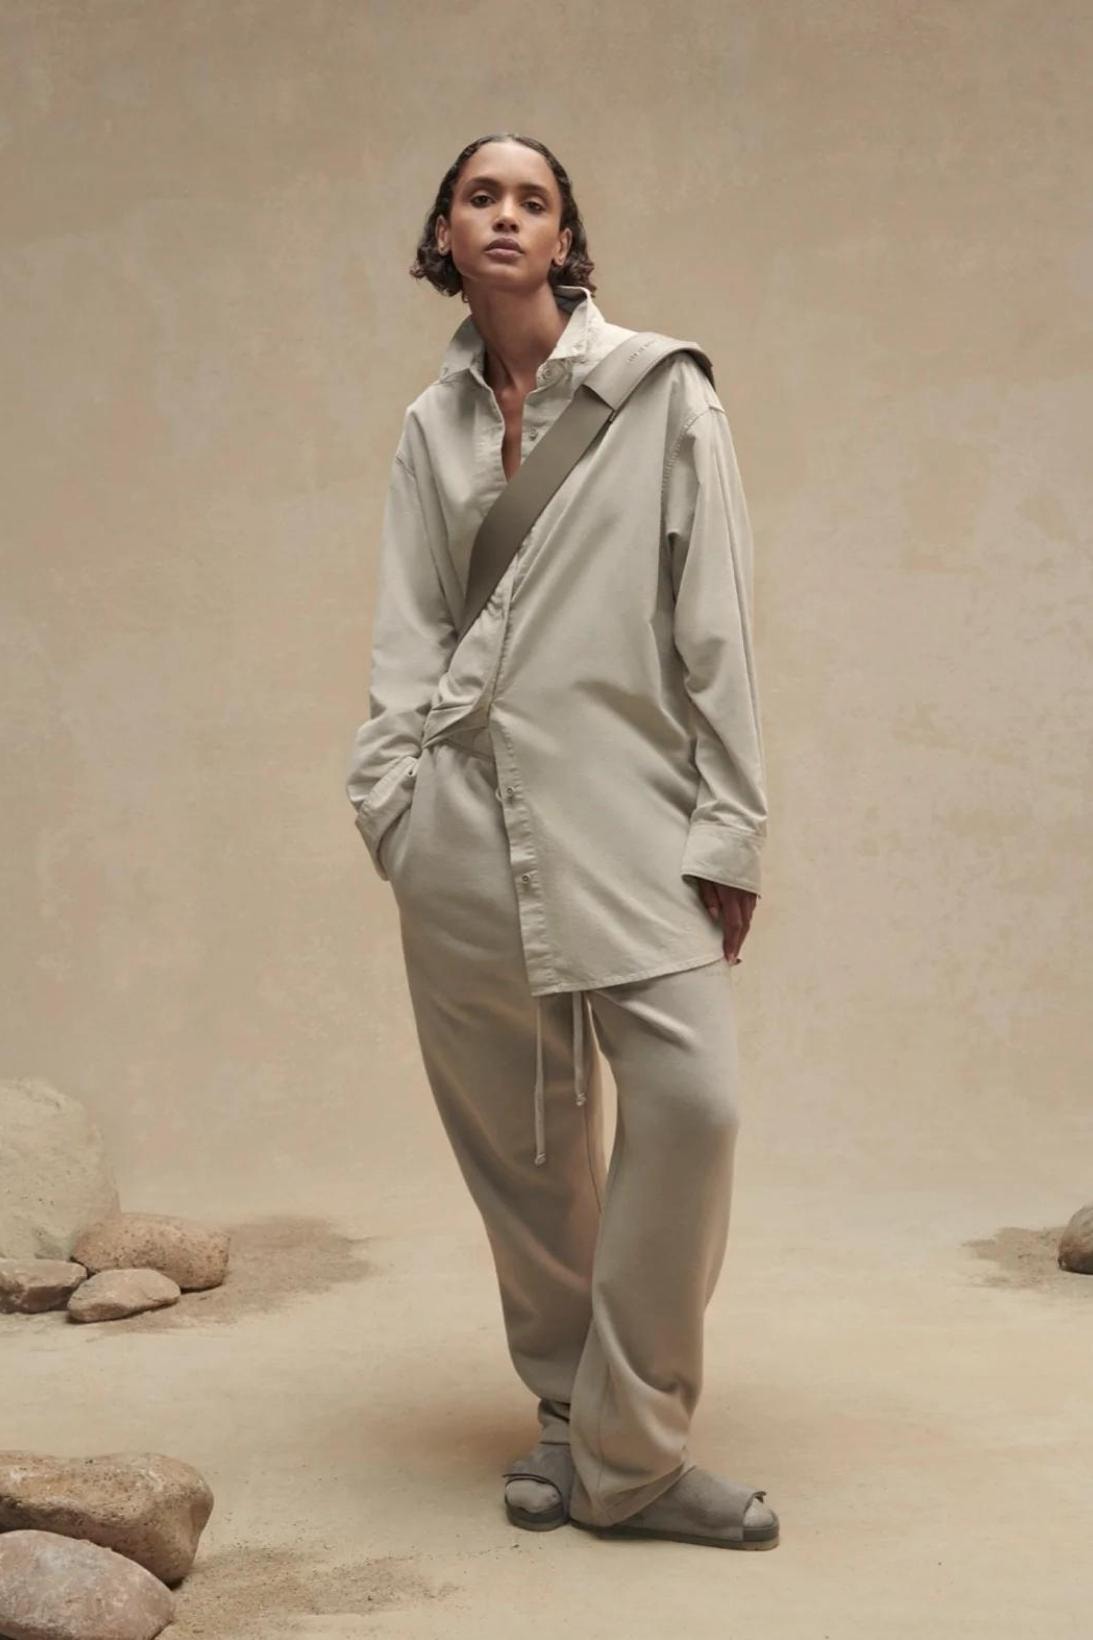 Essentials Jerry Lorenzo Fall 2022 Drop 2 Women's Collection